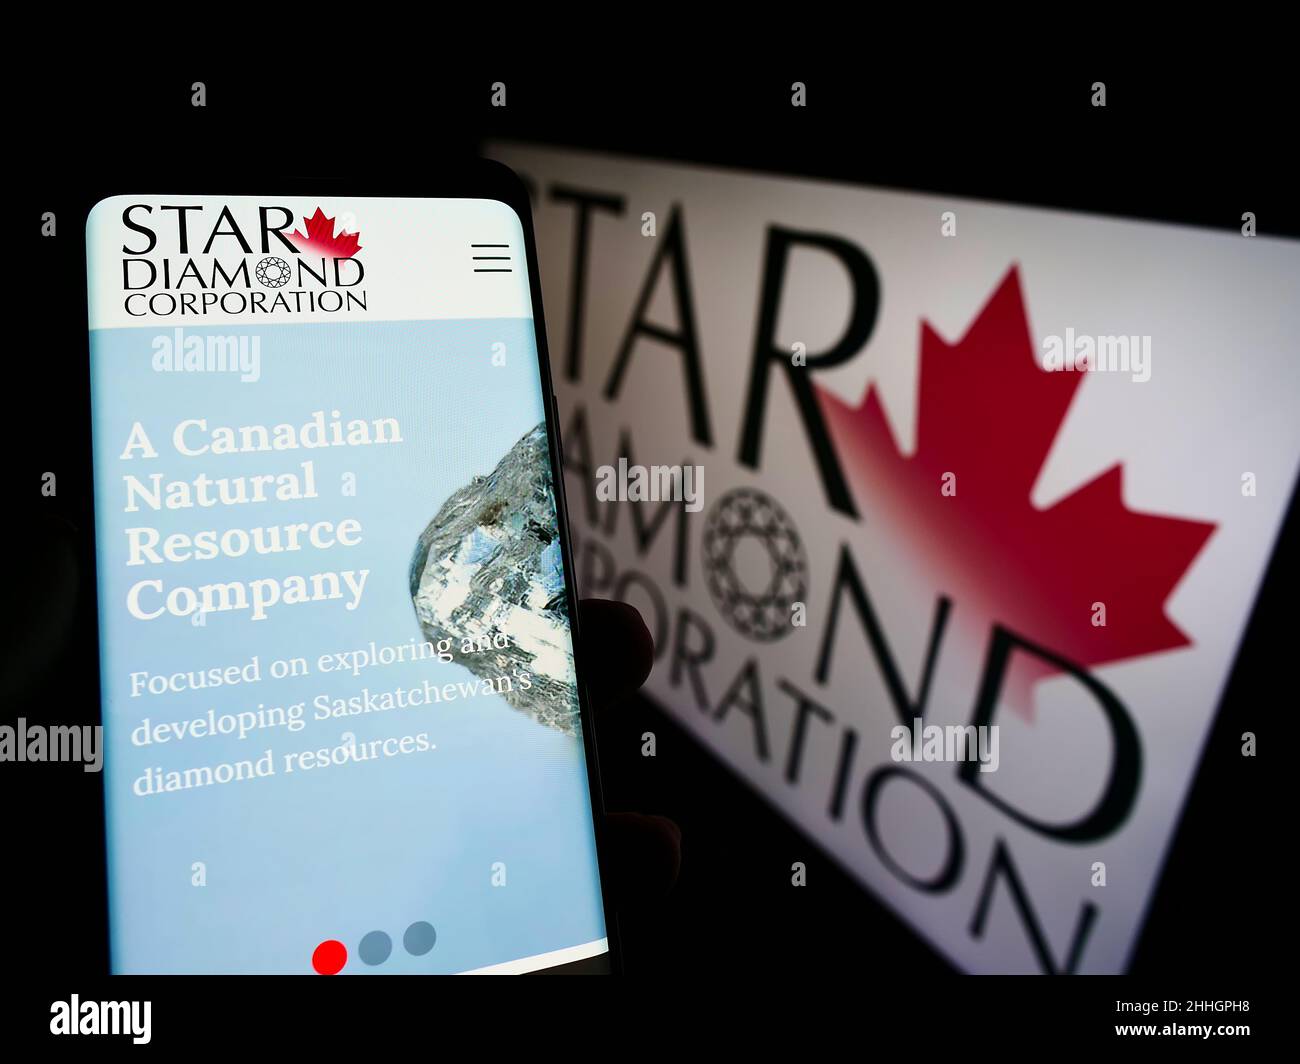 Person holding cellphone with website of Canadian mining company Star Diamond Corporation on screen with logo. Focus on center of phone display. Stock Photo